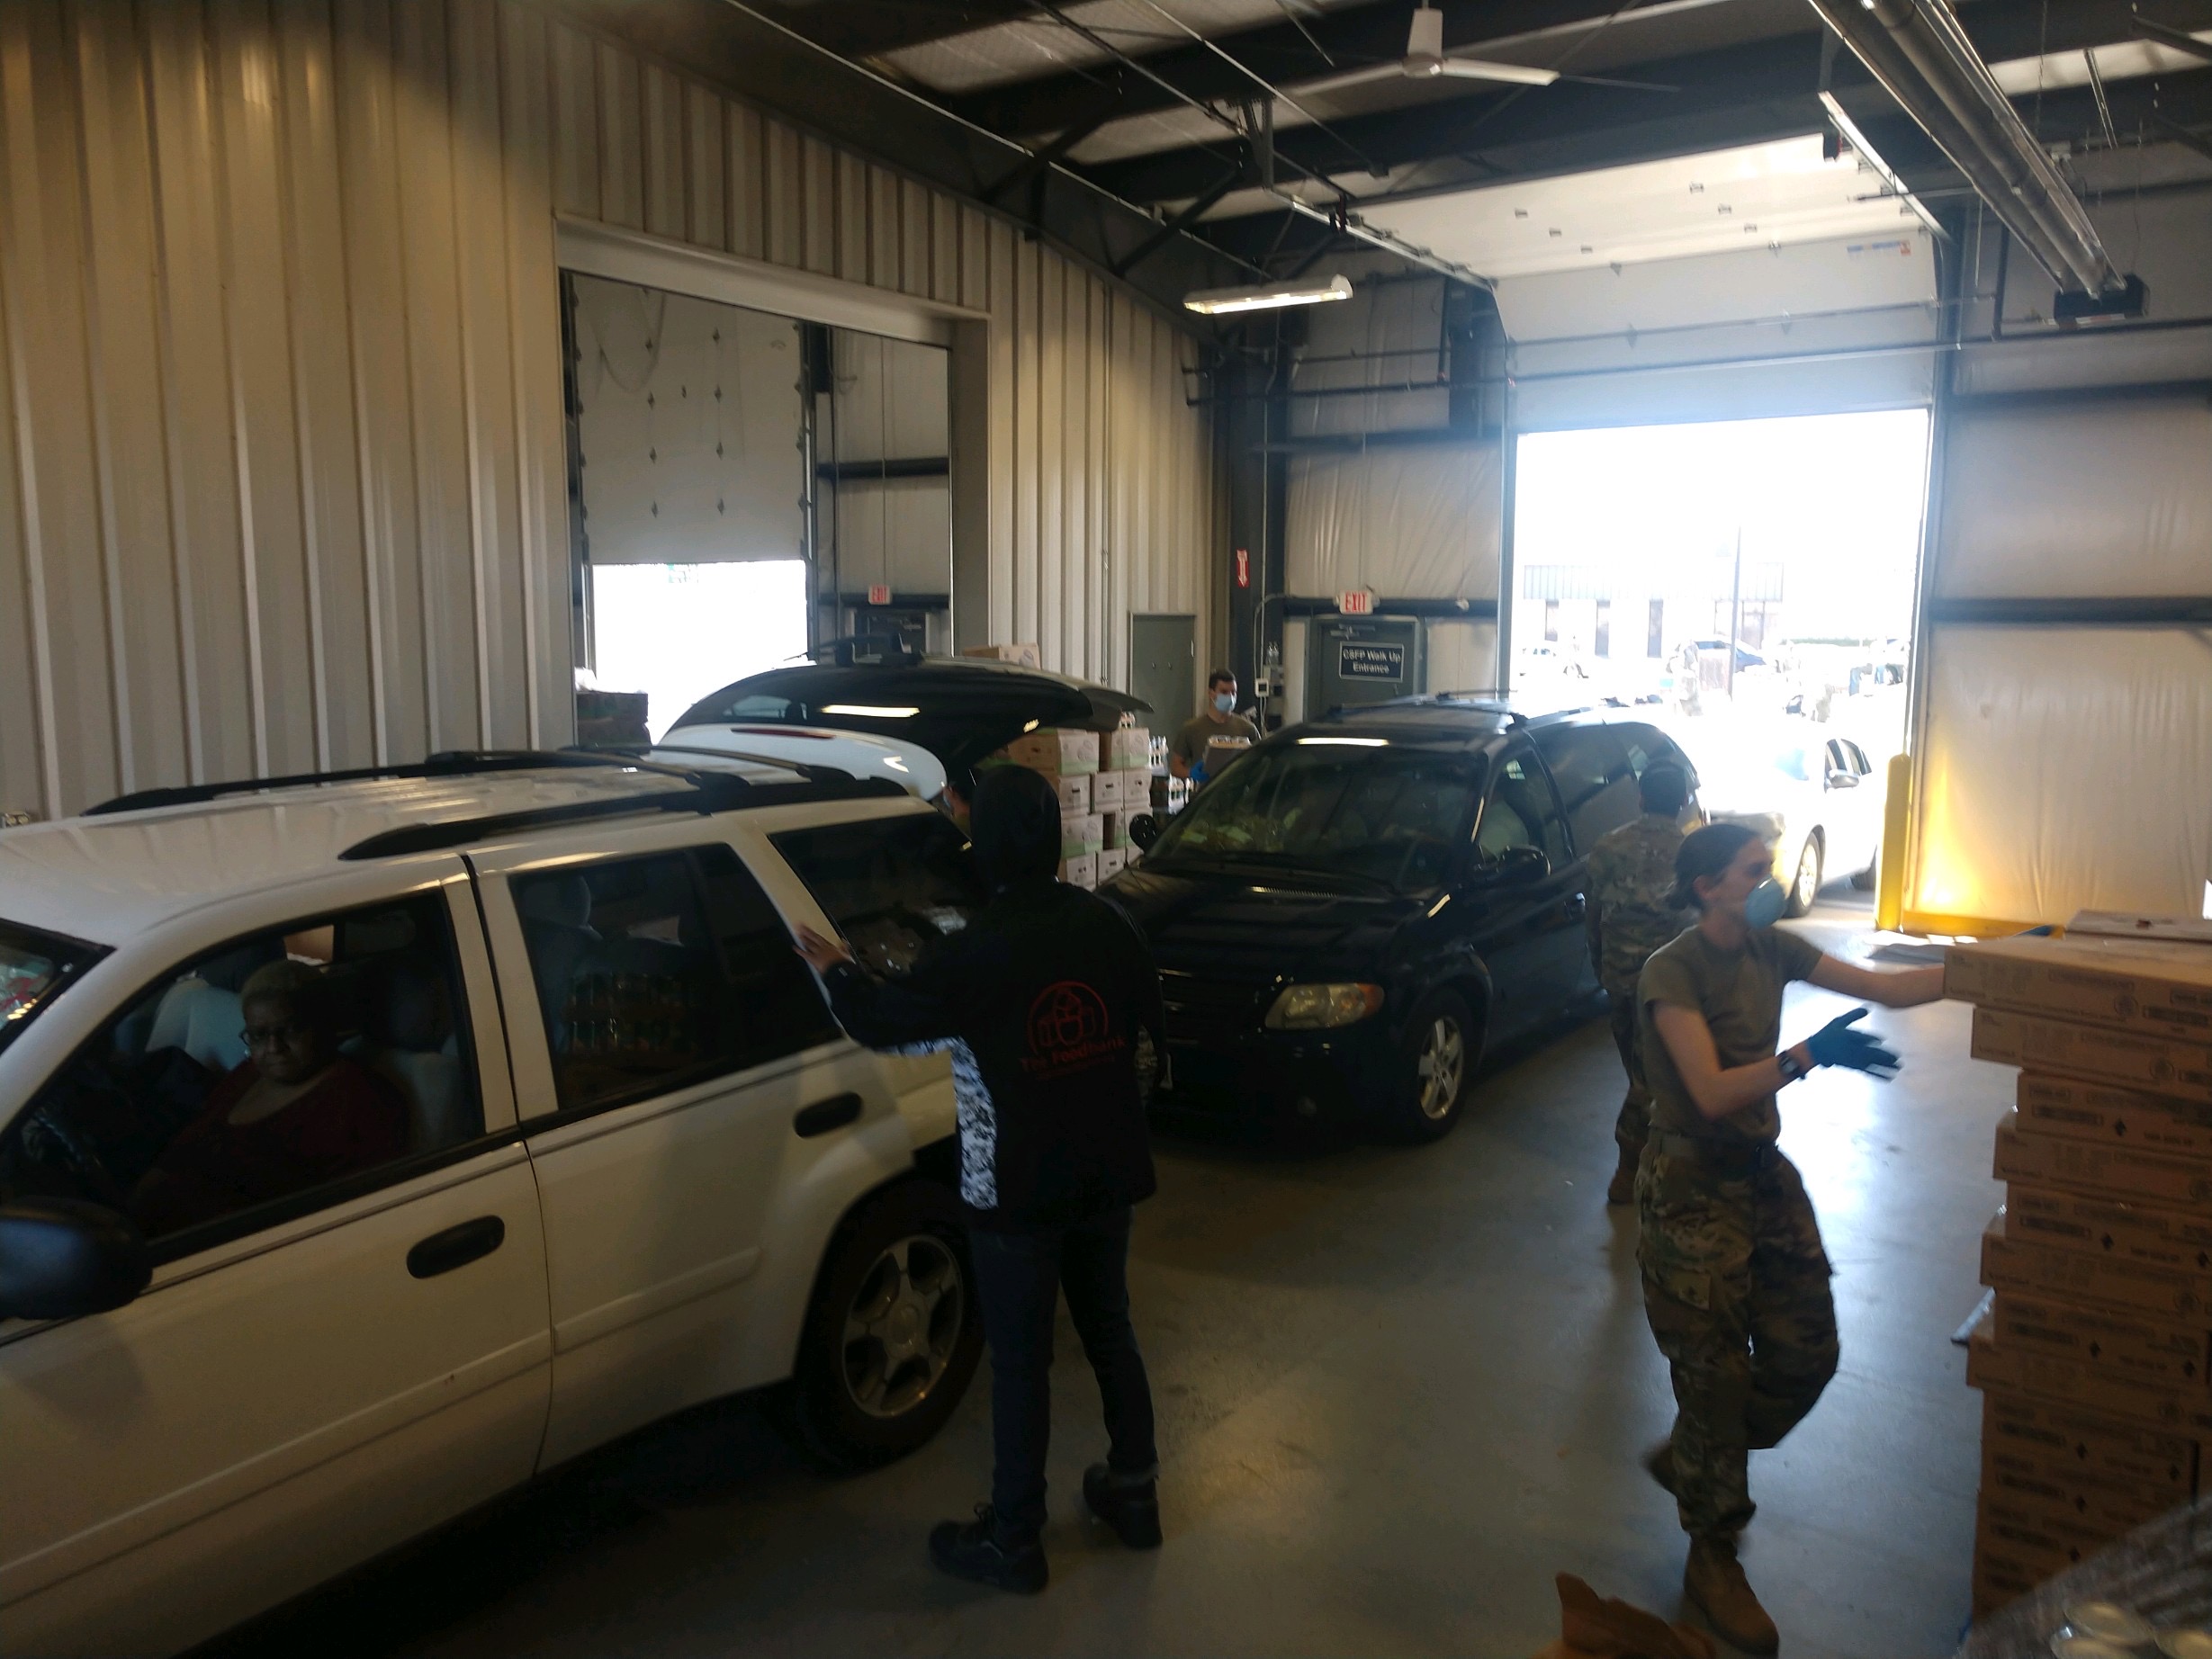 Soldiers load boxes into cars.